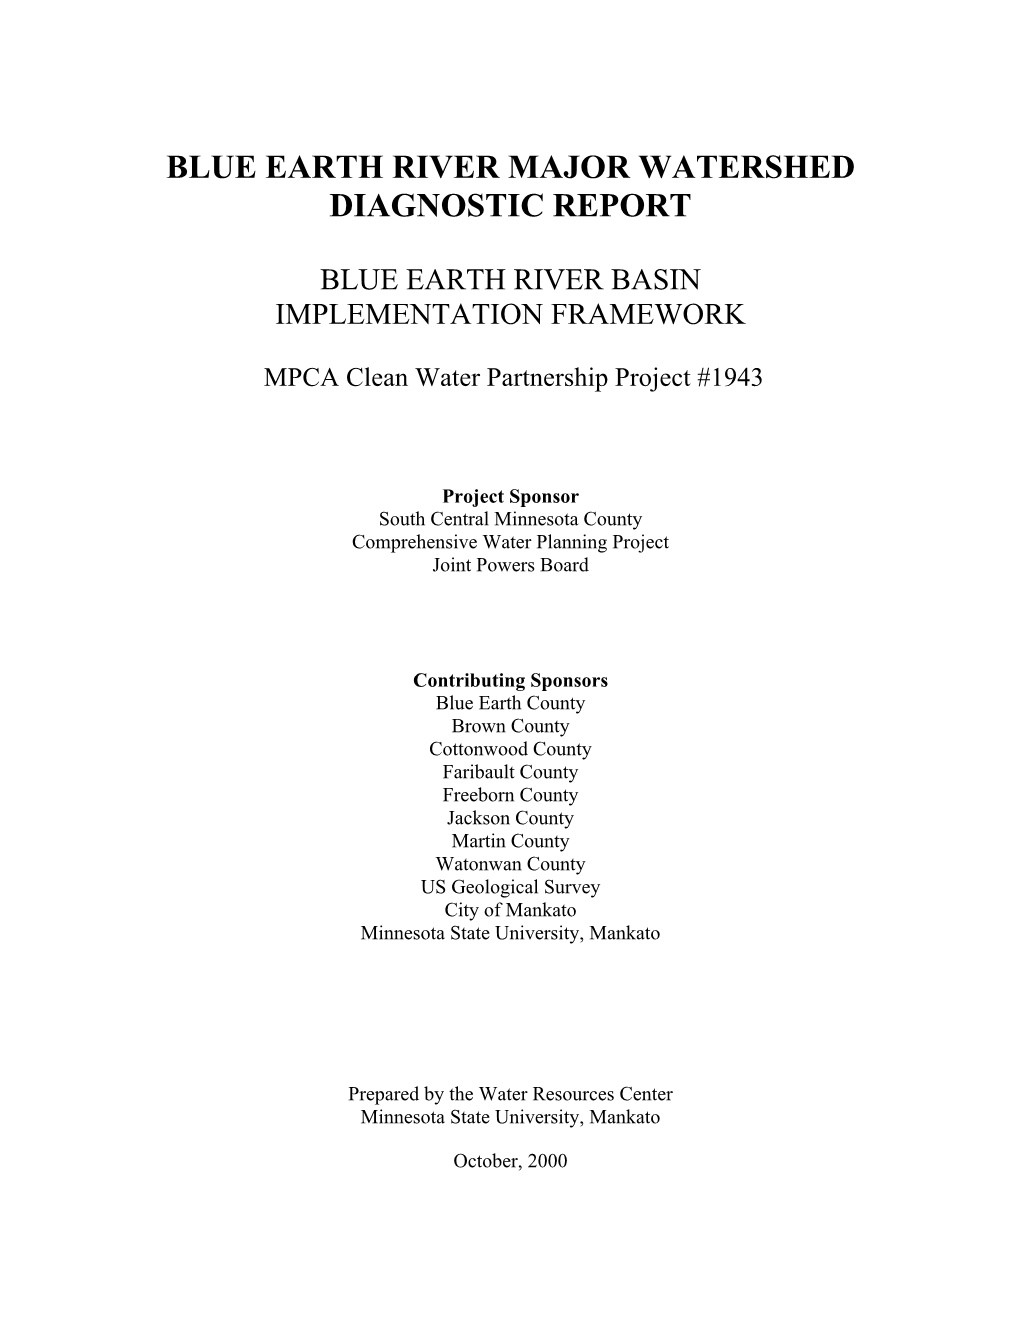 Blue Earth River Major Watershed Diagnostic Report